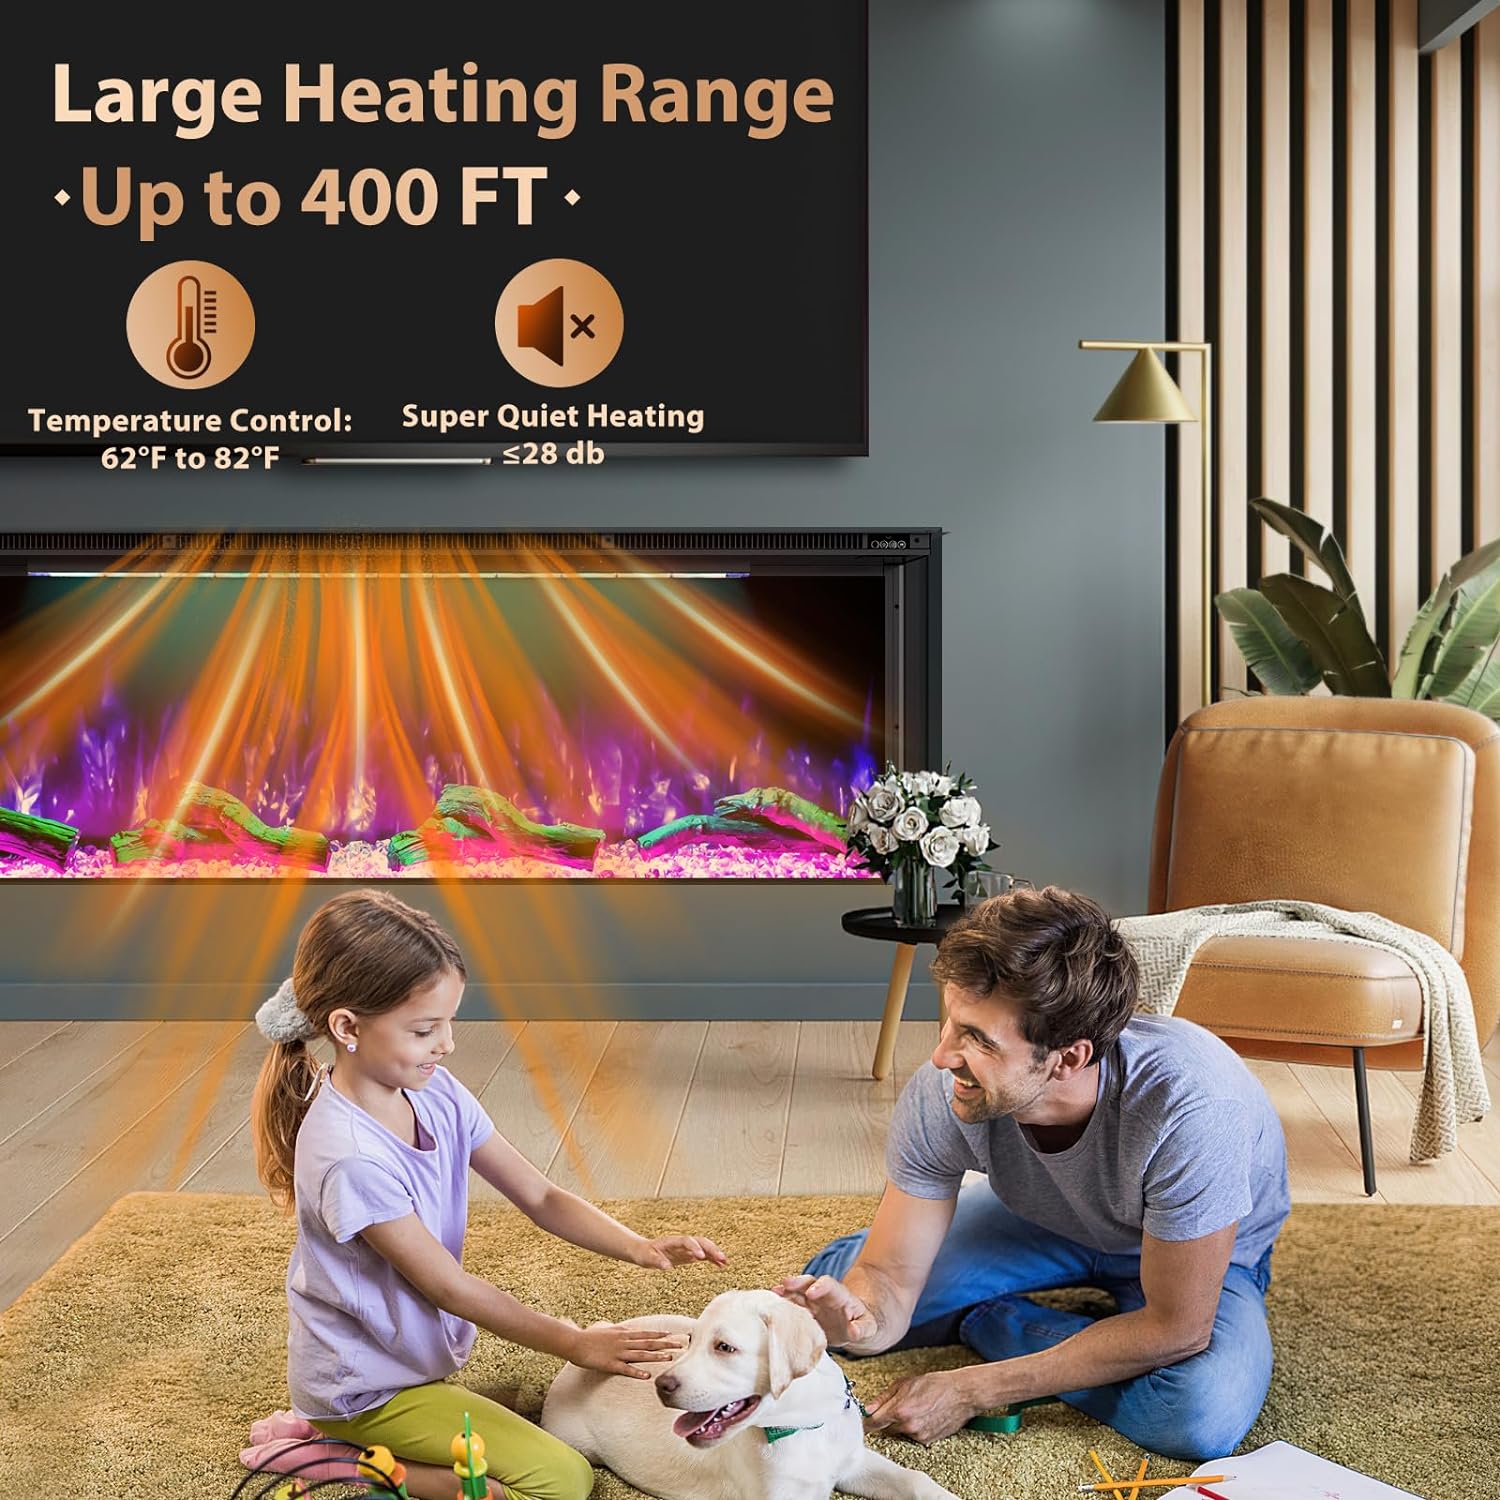 Recessed 3-Sided Electric Fireplace, 70-inch Smart WiFi 251 Flame Colors Combination Inserts Eletric Fire Place Heater for Living Room Indoor Use with Remote Control, Log & Crystals, Black